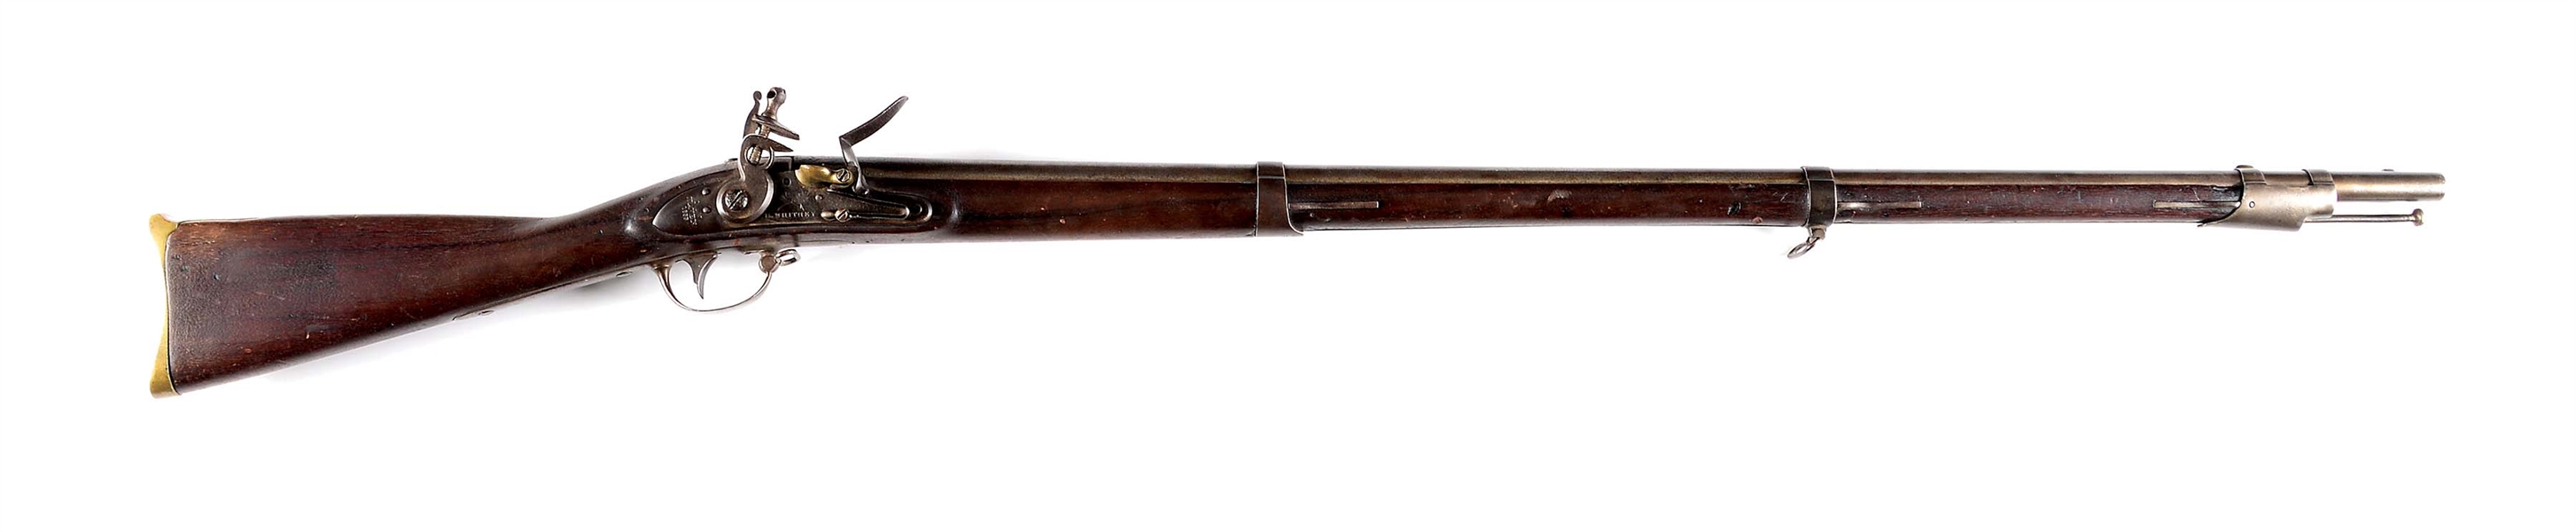 (A) US M1816 NAVY FLINTLOCK MUSKET BY WHITNEY DATED 1833.